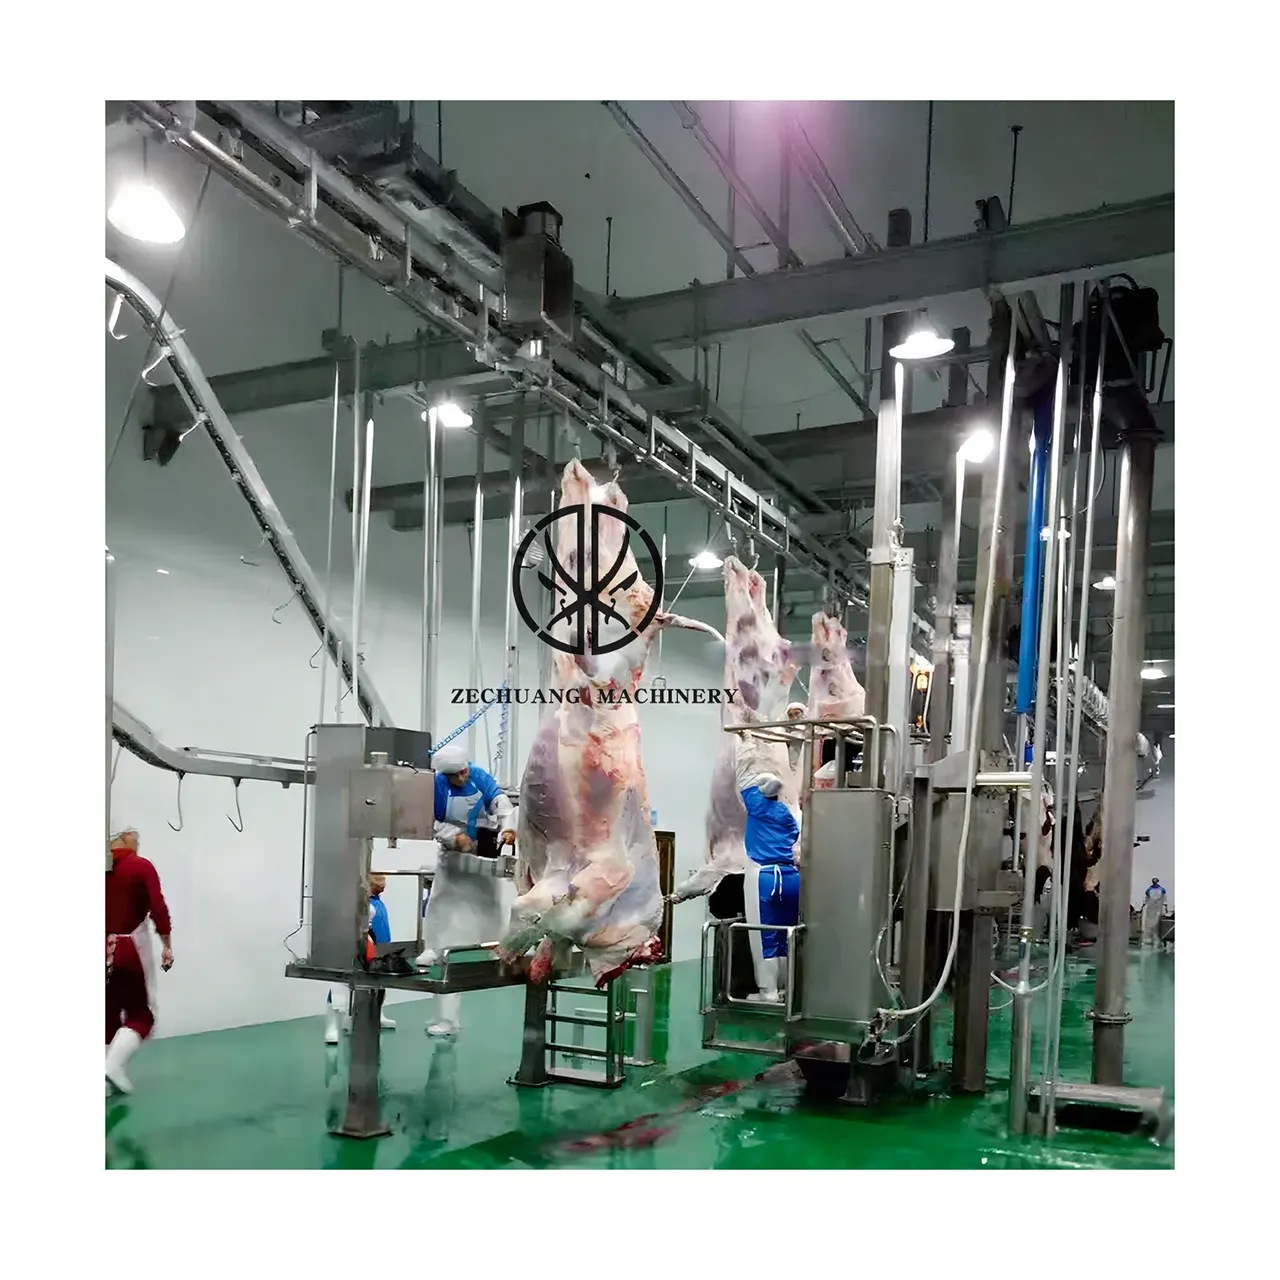 Chinese Manufacturer Halal Cow Abattoir Equipment Muslim Buffalo Meat Slaughtering Stunning Machine Breast Opening Saw